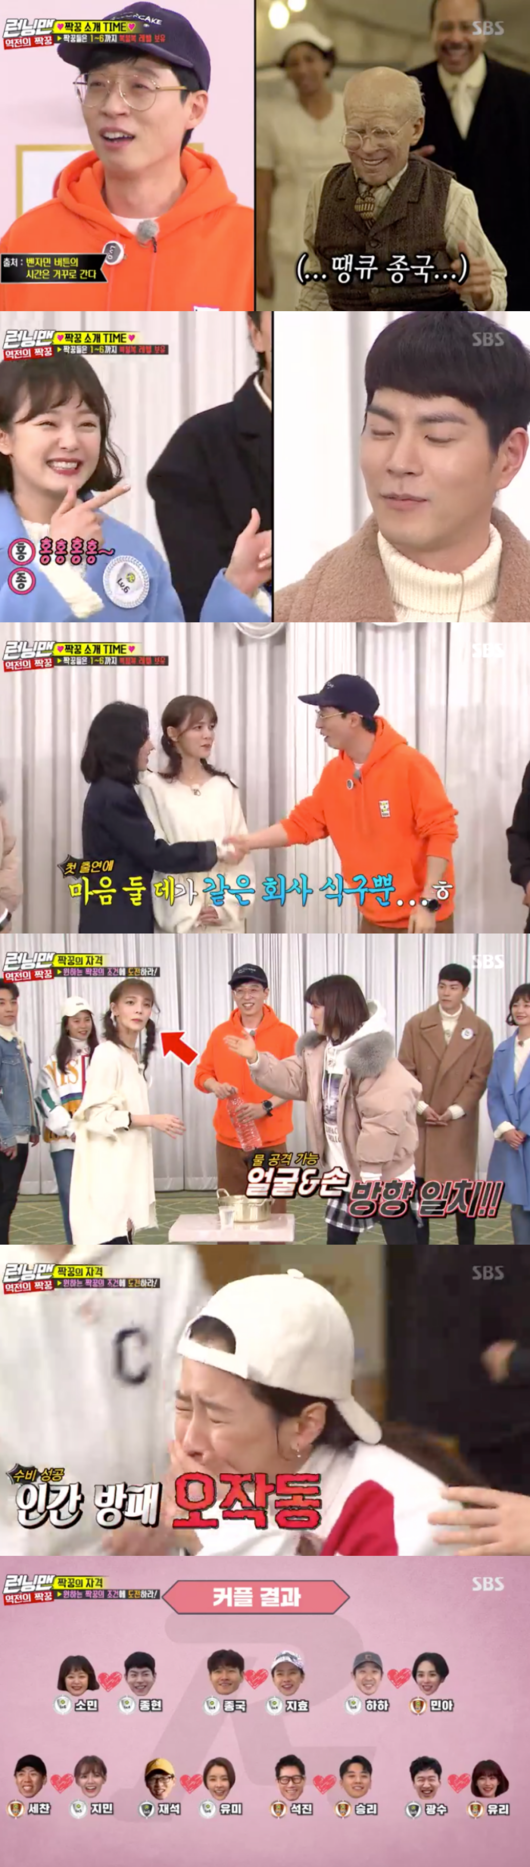 The Power Couple Who Win the Running Man.Kim Jong-kook - Song Ji-hyo has won the Running Man level-up race final after the love line.On SBS Running Man, which was broadcast on the afternoon of the 27th, level race was held following the previous confrontation.The members of Running Man decided to pair with the guest to achieve level 10.Hong Jong-Hyun, Victory, Jung Yu-mi, Lee Yoo-ri, AOA Jimin - Minah appeared.They accepted levels 4, 2, 6, 1, 5, and 3, respectively.Low-levels Yoo Jae-Suk and Lee Kwang-soo aimed for Jung Yu-mi, who started with level 6.Indeed Jung Yu-mi, a big fan of Yoo Jae-Suk, was thrilled to shake hands with Yoo Jae-Suk.When you said you were getting married, it felt like Brad Bird Pitt was getting married, he said.Kim Jong-kook said, Yoo Jae-Suk is ugly more than when Brad Bird Pete played grandfather.Before the full-scale couples decision, Jeon So-min and Hong Jong-Hyun boasted pink airflow.Hong Jong-Hyun said, I did not know before, but Mr. Somin is actually pretty.I will let Min take a picture of my sister today. Jeon So-min made a three-way poem, and Jeon So-min also said, Hong Hong Hong Hong.My heart toward Jong-hyun is on the way, he replied in the third act of Hong Jong-Hyun. Eventually, they formed a couple.Jung Yu-mi, a level 6, said he hoped his partner would be full of power, so the members had a great battle with the water cup.As a fan, he was paired with Yoo Jae-Suk, and Kim Jong-kook also wanted a true confrontation of female members.The members joined together to make Song Ji-hyo, who was tied up with Kimbap couple during the opening, a partner of Kim Jong-kook, and they also became a couple.As a result of the fierce couples decision, Kim Jong-kook - Song Ji-hyo, Yoo Jae-Suk - Jung Yu-mi, Jeon So-min - Hong Jong-Hyun, Yang Se-chan - Jimin completed the high-level team.Ji Suk-jin - Victory, Haha - Minah, Lee Kwang-soo - Lee Yoo-ri was aiming for a band electrode because they were low level even if they combined.These seven teams had to reach level 10 through the second round to win the championship.The first couple Game is a couple chase game on the ice, Blood.Yoo Jae-Suk - Jung Yu-mi, Lee Kwang-soo - Lee Yoo-ri, Kim Jong-kook - Song Ji-hyo, Yang Se-chan - Jimin reached the semi-finals.After twists and turns, Lee Kwang-soo - Lee Yoo-ri, Kim Jong-kook - Song Ji-hyo team reached the final, but Kim Jong-kook - Song Ji-hyo team, who had already exhausted their physical strength in the semi-finals, was caught.But Lee Kwang-soo laughed because he couldnt easily burst the balloon.Lee Kwang-soo, who added level 2, liked it, saying it was level 2 at level 0; Kim Jong-kook, who was second, conceded level 1 to Song Ji-hyo.The members named Kim Jong-kook and Song Ji-hyo as the couple of Kimbap couple.Whenever they played Game, they continued to sing recollection and man. When Kim Jong-kook conceded to the level, the pink light grew even more intense.The second round was the Level-Up Chair King Race.The Hong Jong-Hyun - Jeon So-min team and Yang Se-chan - Jimin team, who are aiming for the first chair, fought.Thanks to these, Ji Suk-jin - Victory, Kim Jong-kook - Song Ji-hyo took the chair comfortably even though it was late.Lee Yoo-ri, who ran to find the second chair, burned the game to the point of subtracting the insole.In the first showdown, the Yoo Jae-Suk - Jung Yu-mi couple were the first to be eliminated; the survival teams vote resulted in Ji Suk-jin - victory becoming the captain couple.The captain couple could drop a couple, who remembered the chair where the high level, Jeon So-min - Hong Jong-Hyun, sat and dropped them.Now the remaining four teams have relaunched the chair race.Lee Yoo-ri let out a pity villain force, knocking out the Haha - Minah couple.Yang Se-chan - Jimin couple who became a captain couple named Kim Jong-kook - Song Ji-hyo couple as dropouts.But Yang Se-chan - a Jimin couple who were eliminated from the third game took the authority to decide the final number one.They gave Lee Kwang-soo - Lee Yoo-ri a first-place finish and a level-up.But all seven teams failed to reach level 10; eventually the final ranking was set as the final roulette; the members who took the roulettes compartment as much as they had acquired.The final number one was Kim Jong-kook - Song Ji-hyo, who was tied up as a couple all day.Haha - Those who stayed in only one room between the Minah couples names enjoyed the joy of hugging.Running Man